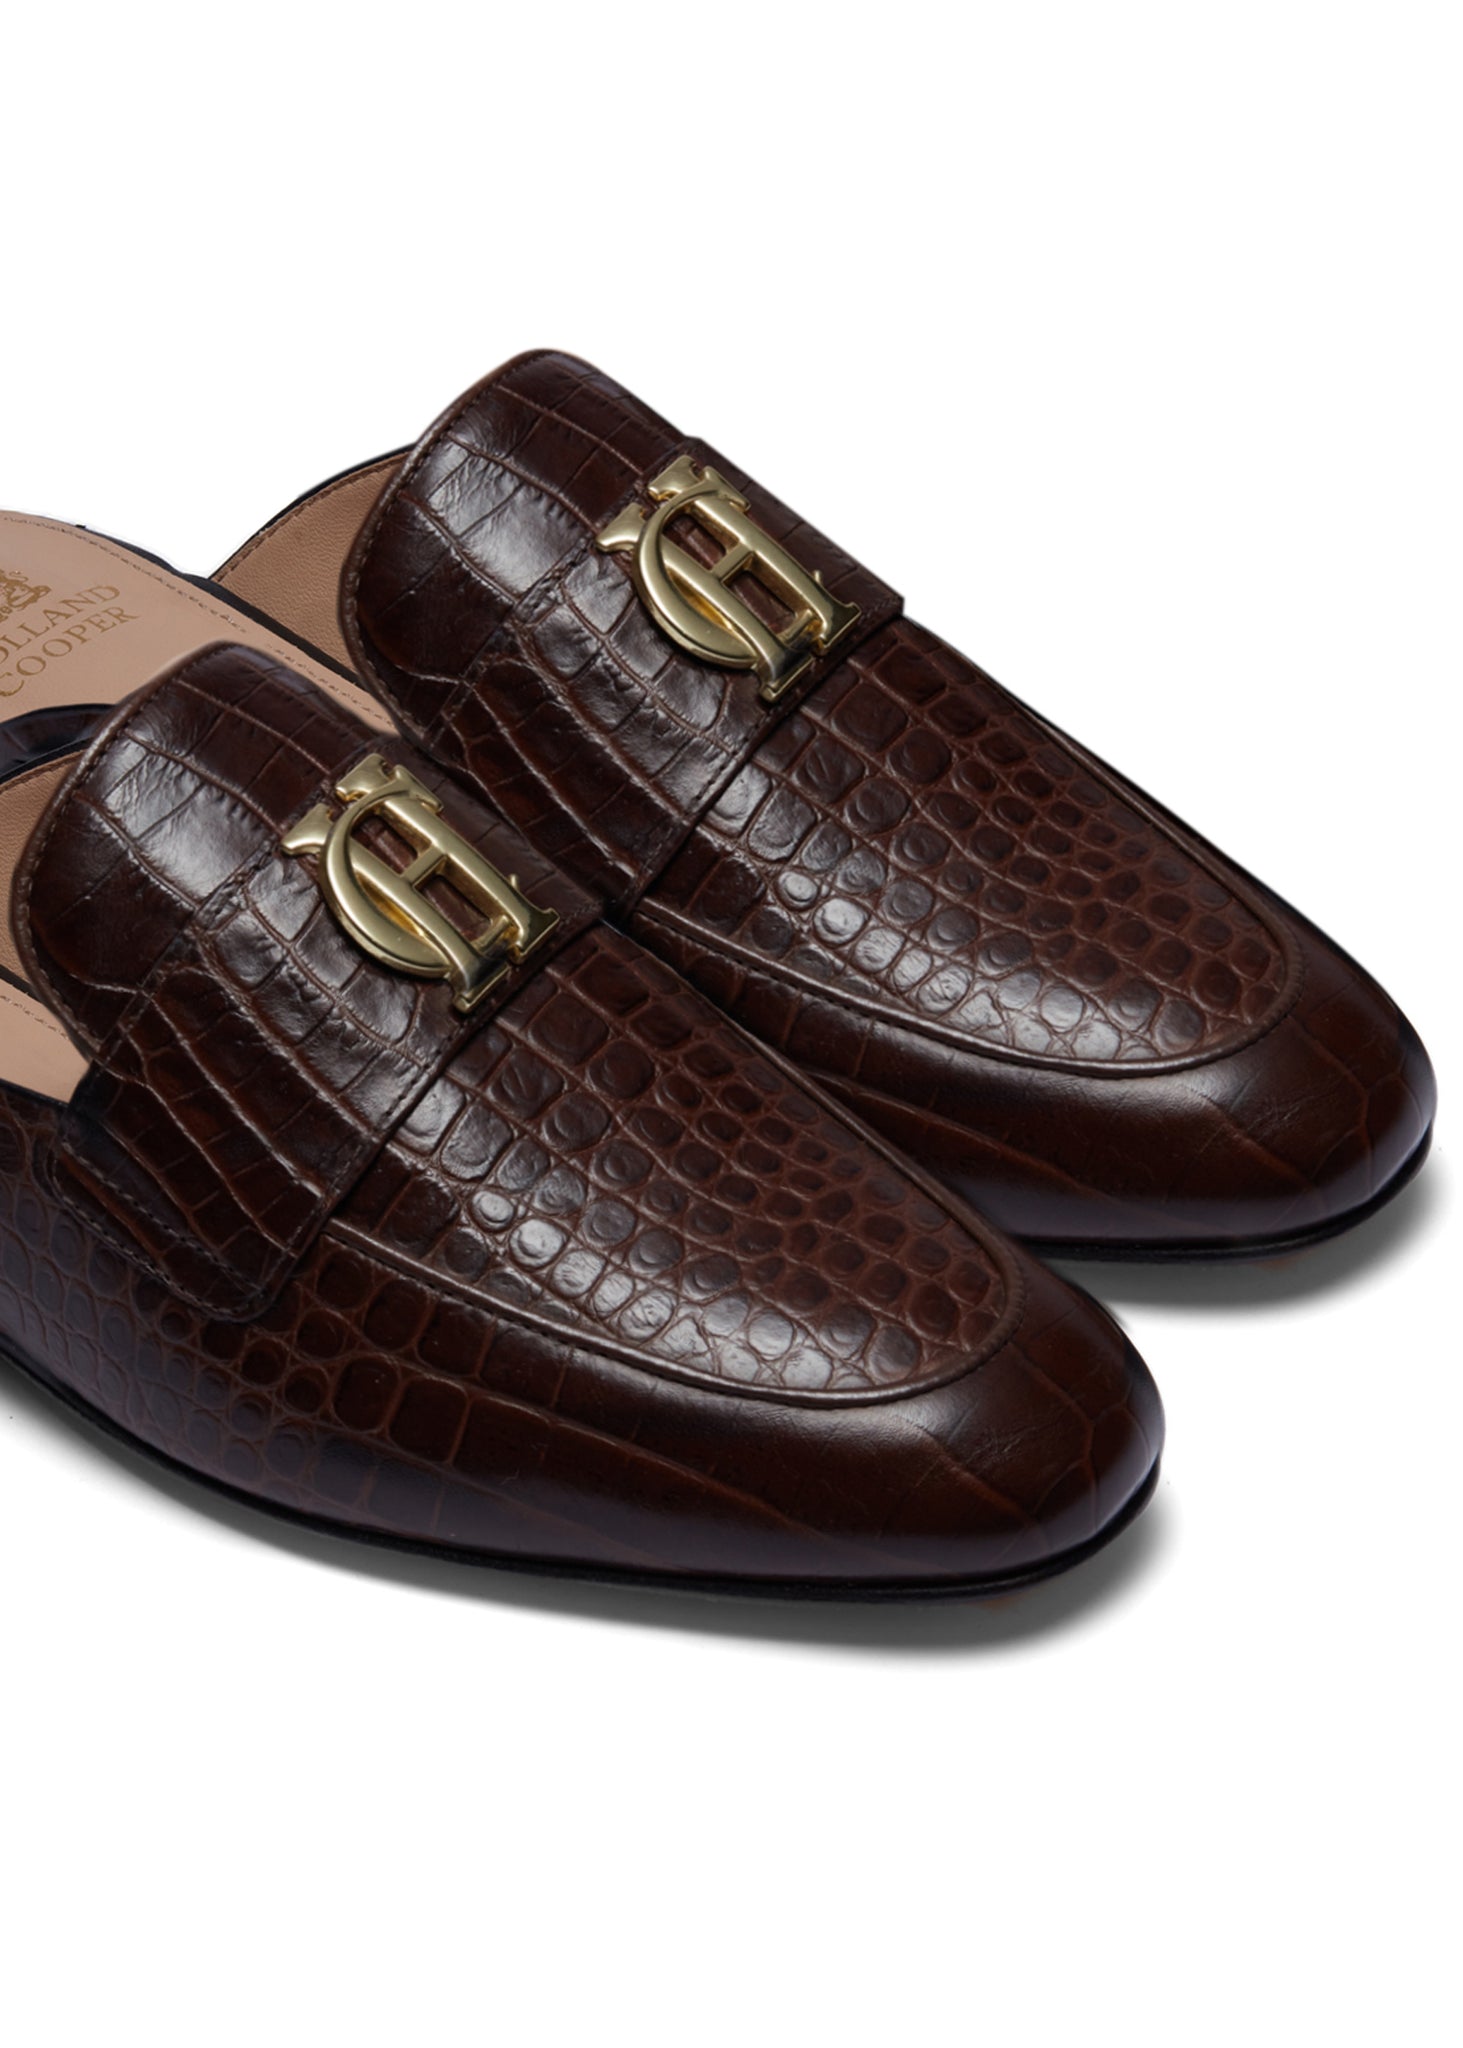 Close up of gold hardware brown croc embossed leather backless loafers with a slightly pointed toe and gold foil branding on the inner sole